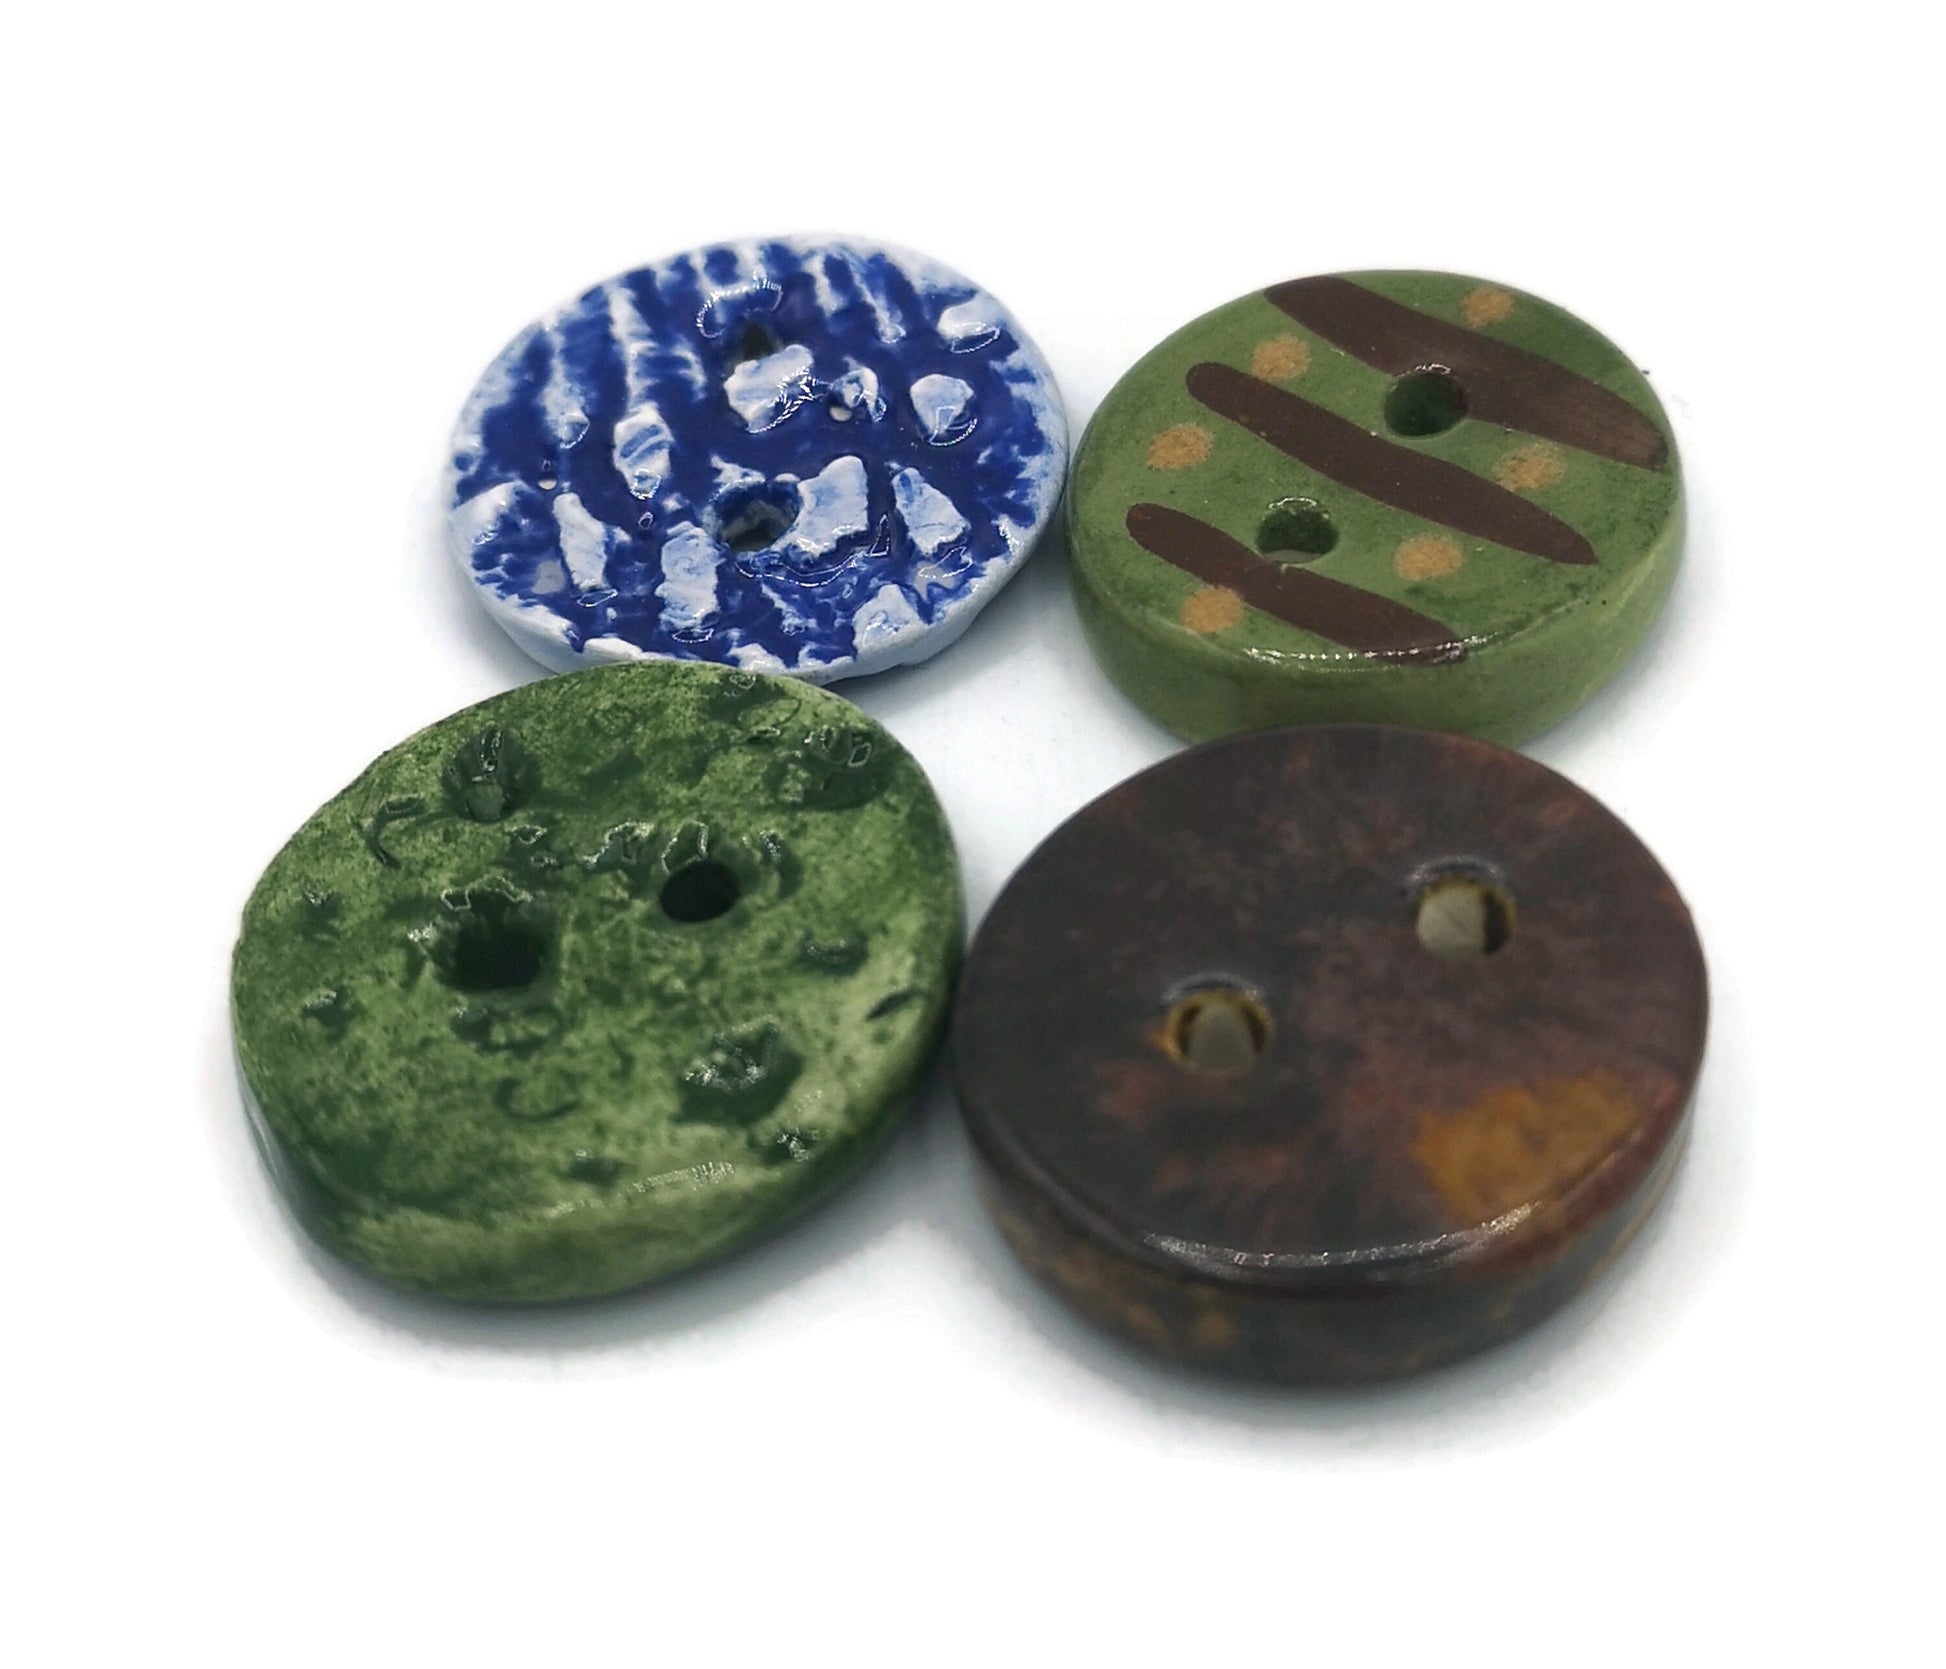 4Pc 30mm Handmade Ceramic Sewing Buttons, Round Large Buttons, Coat Buttons, Jewelry Making Buttons Antique Look, Sewing Supplies and Notion - Ceramica Ana Rafael